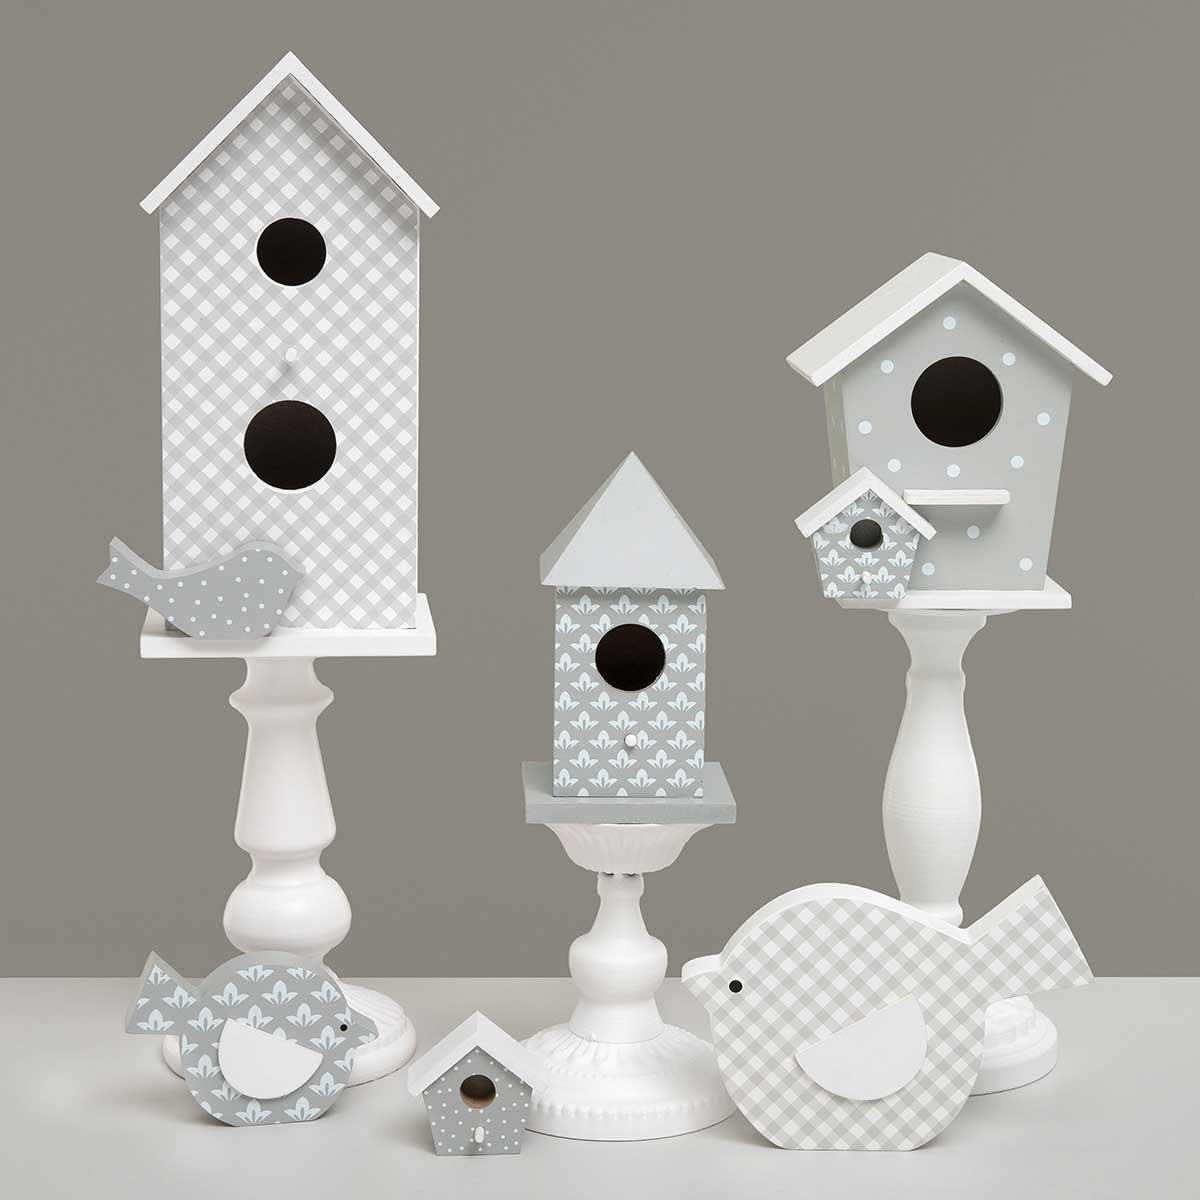 b50 BIRDHOUSE BACKYARD PINDOT 5.25IN X 4IN X 6IN WOOD - Click Image to Close